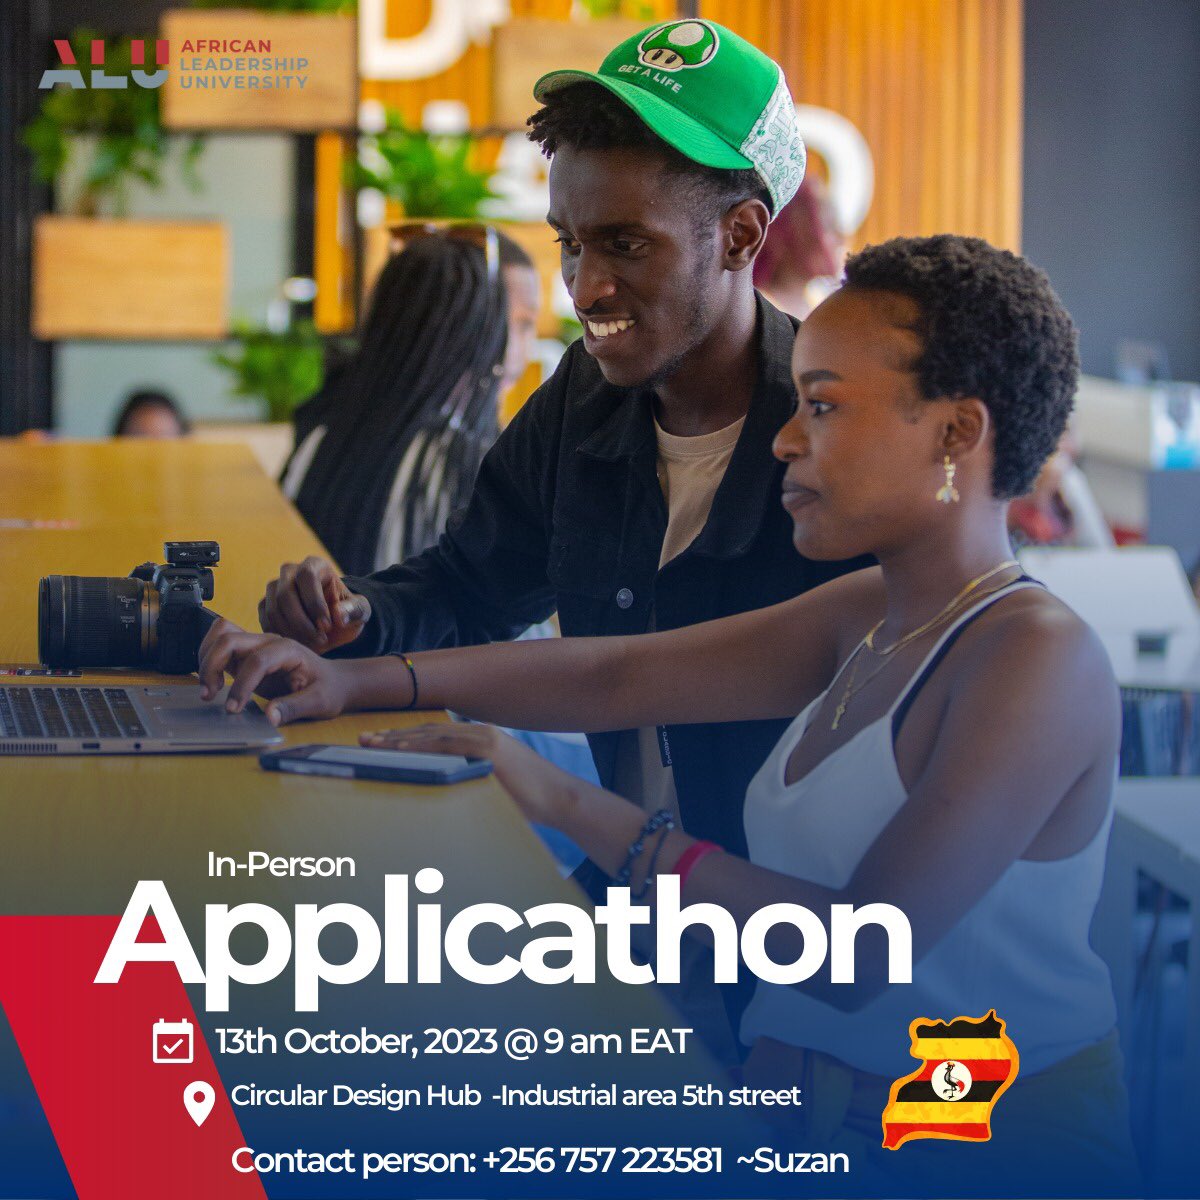 This is your opportunity to be part of the 3 Million ethical leaders being nurtured at @alueducation. Join us on Friday 13, October at 9:00am for a guided application session to Join ALU. Fill in this form to reserve you slot. shorturl.at/lqAUX